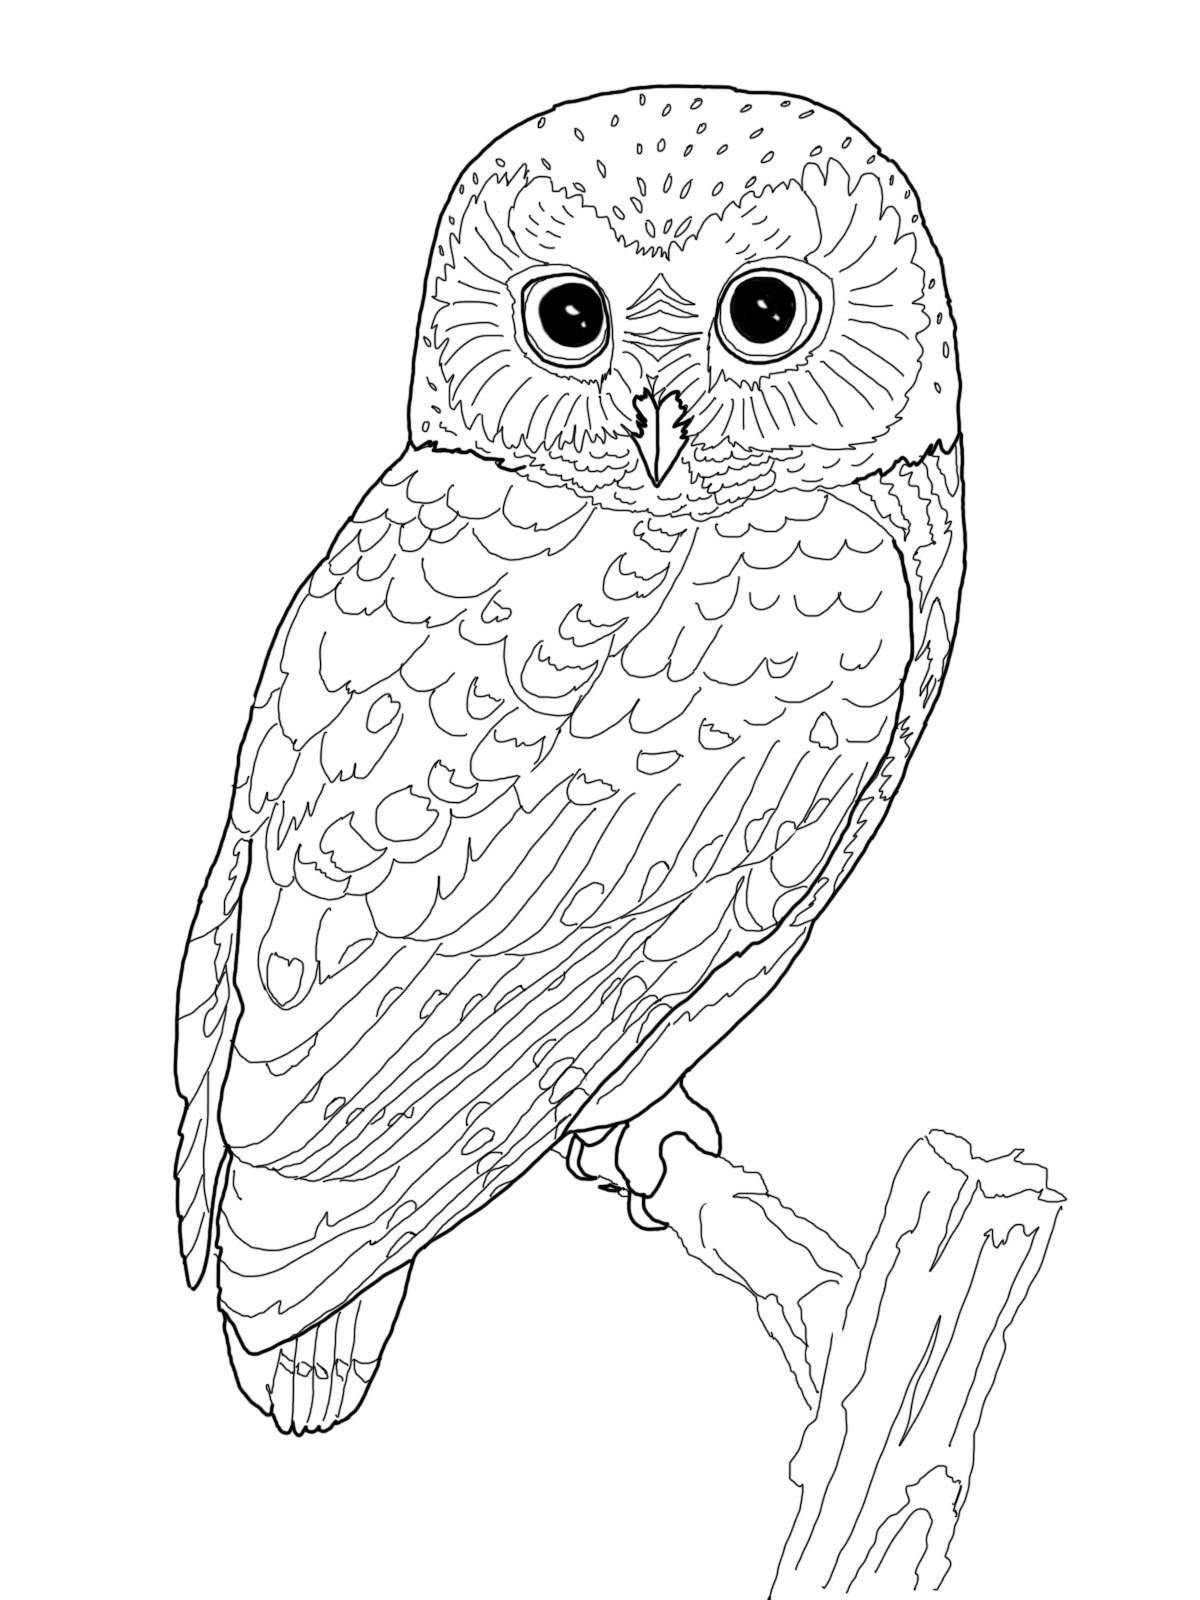 Adorable owlet coloring page